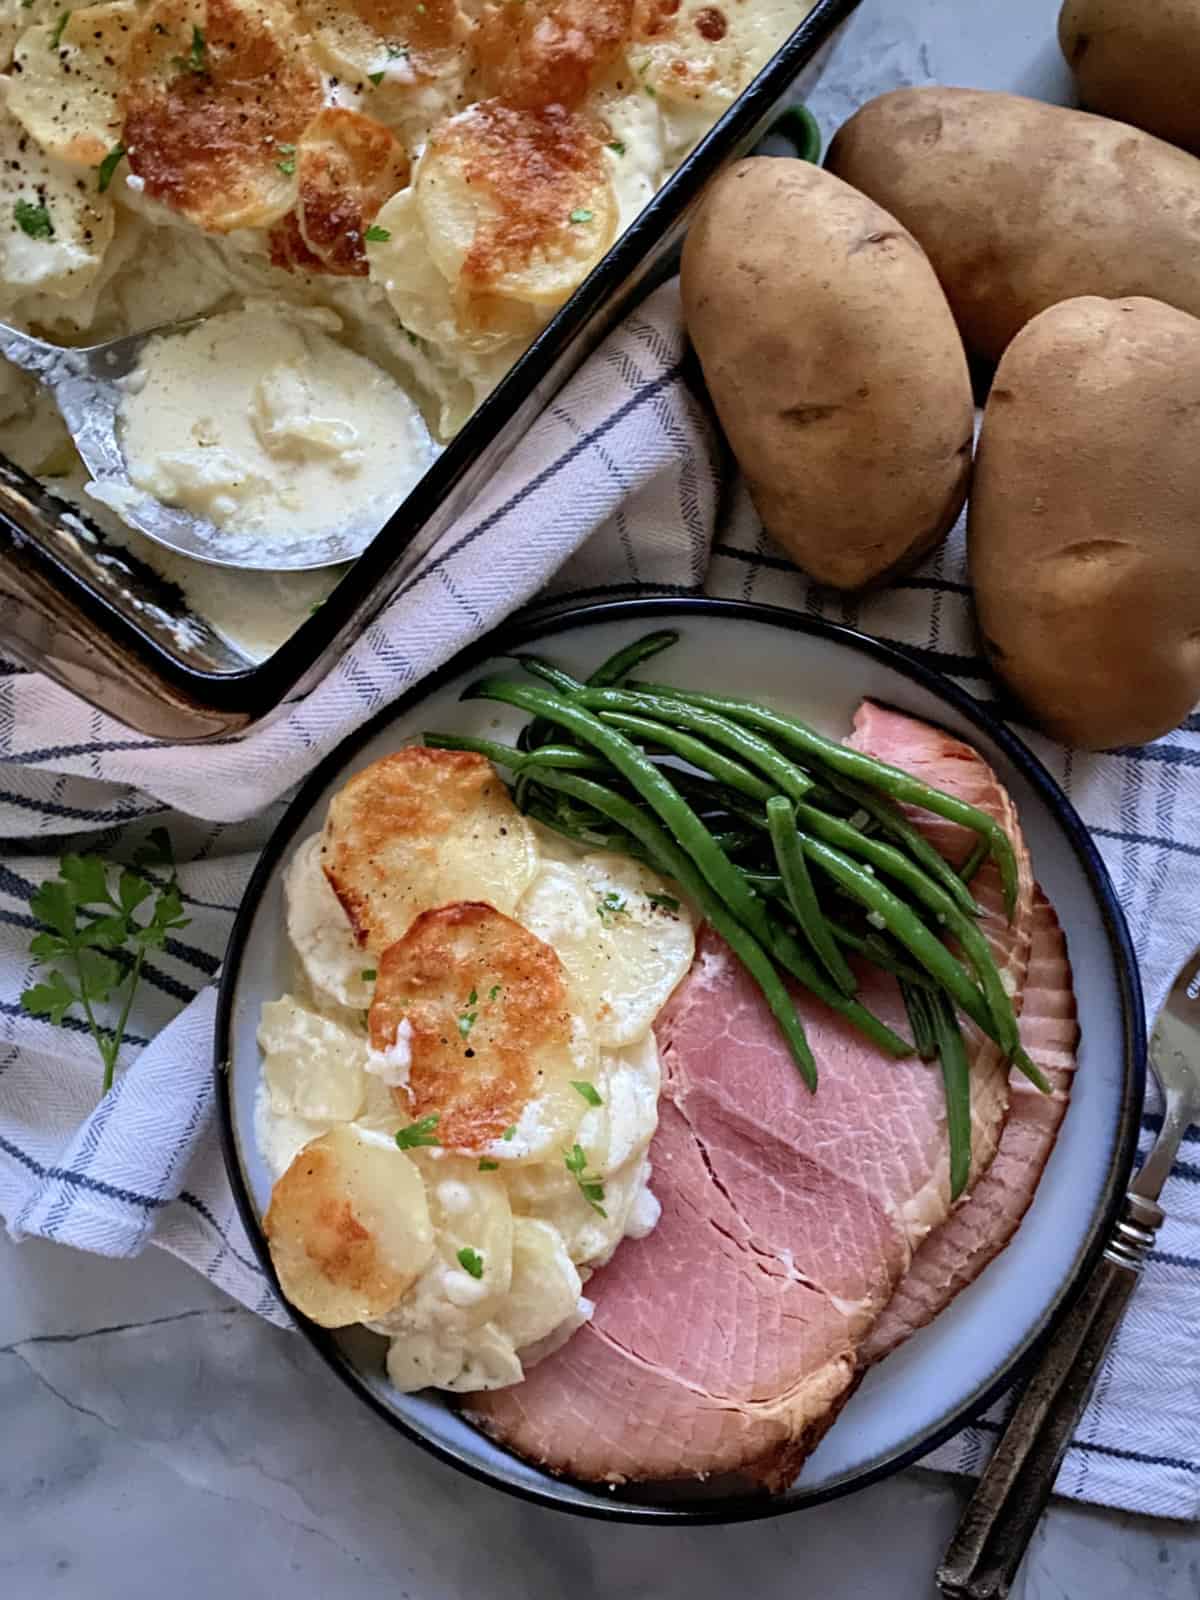 Top view of a plate filled with ham, creamy potatoes, and green beans with a baking dish filled with creamy potatoes next to it.